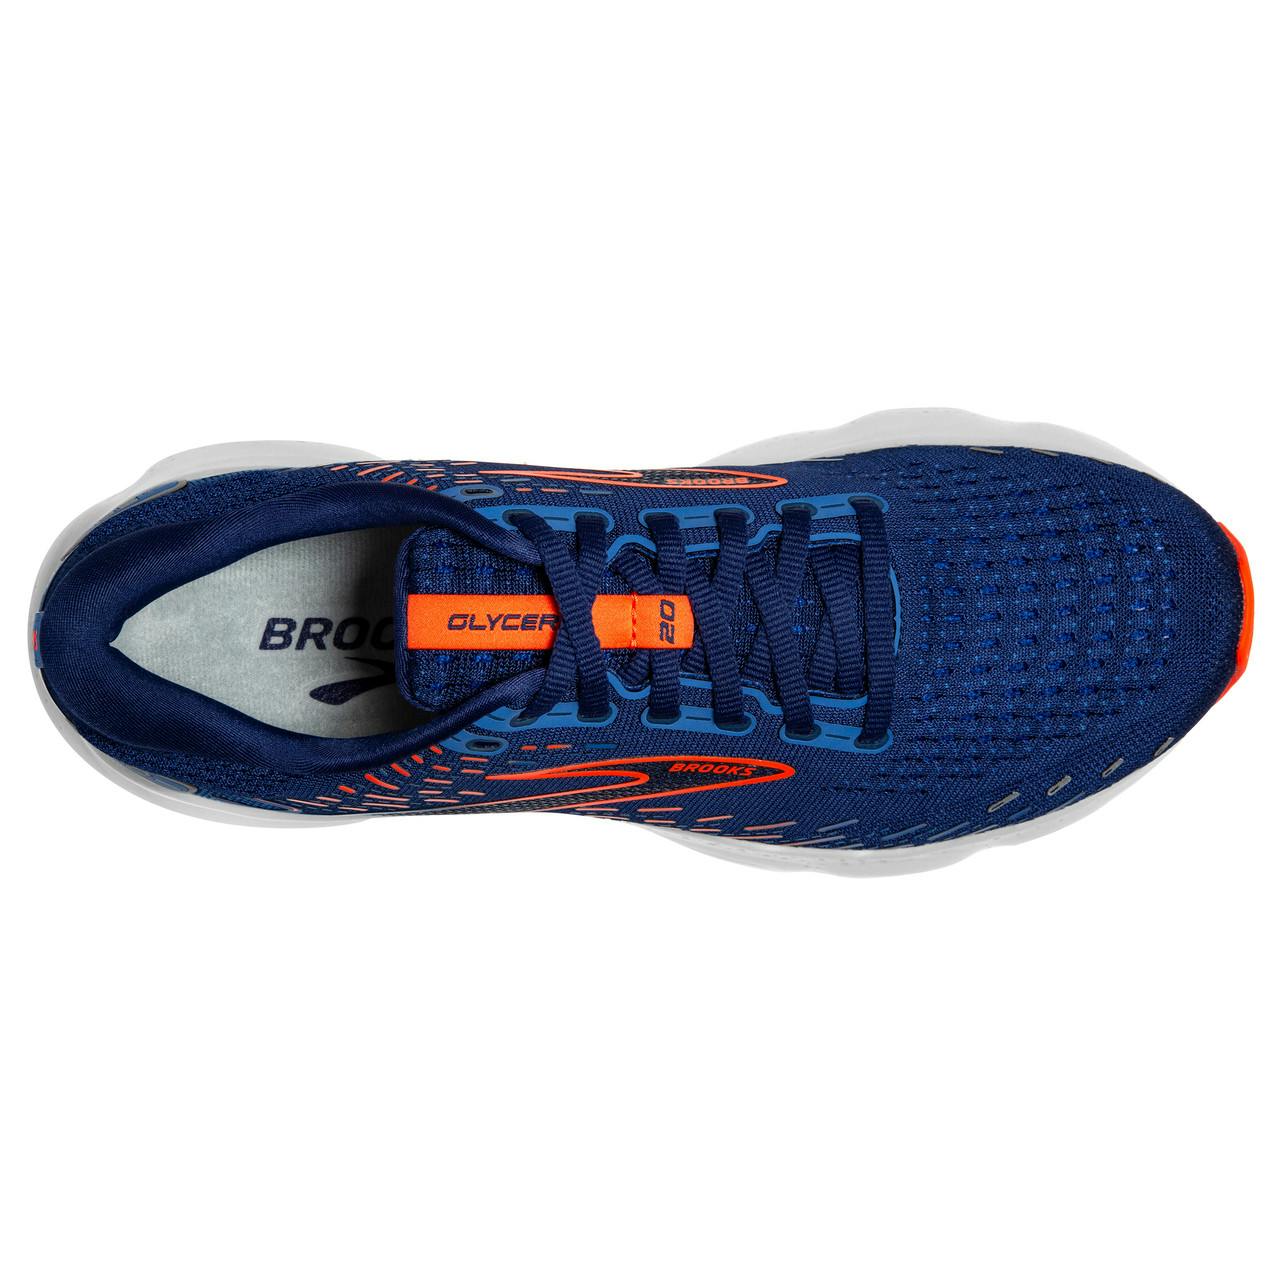 Glycerin 20 Road Running Shoes Blue Depths/Palace Blue/O